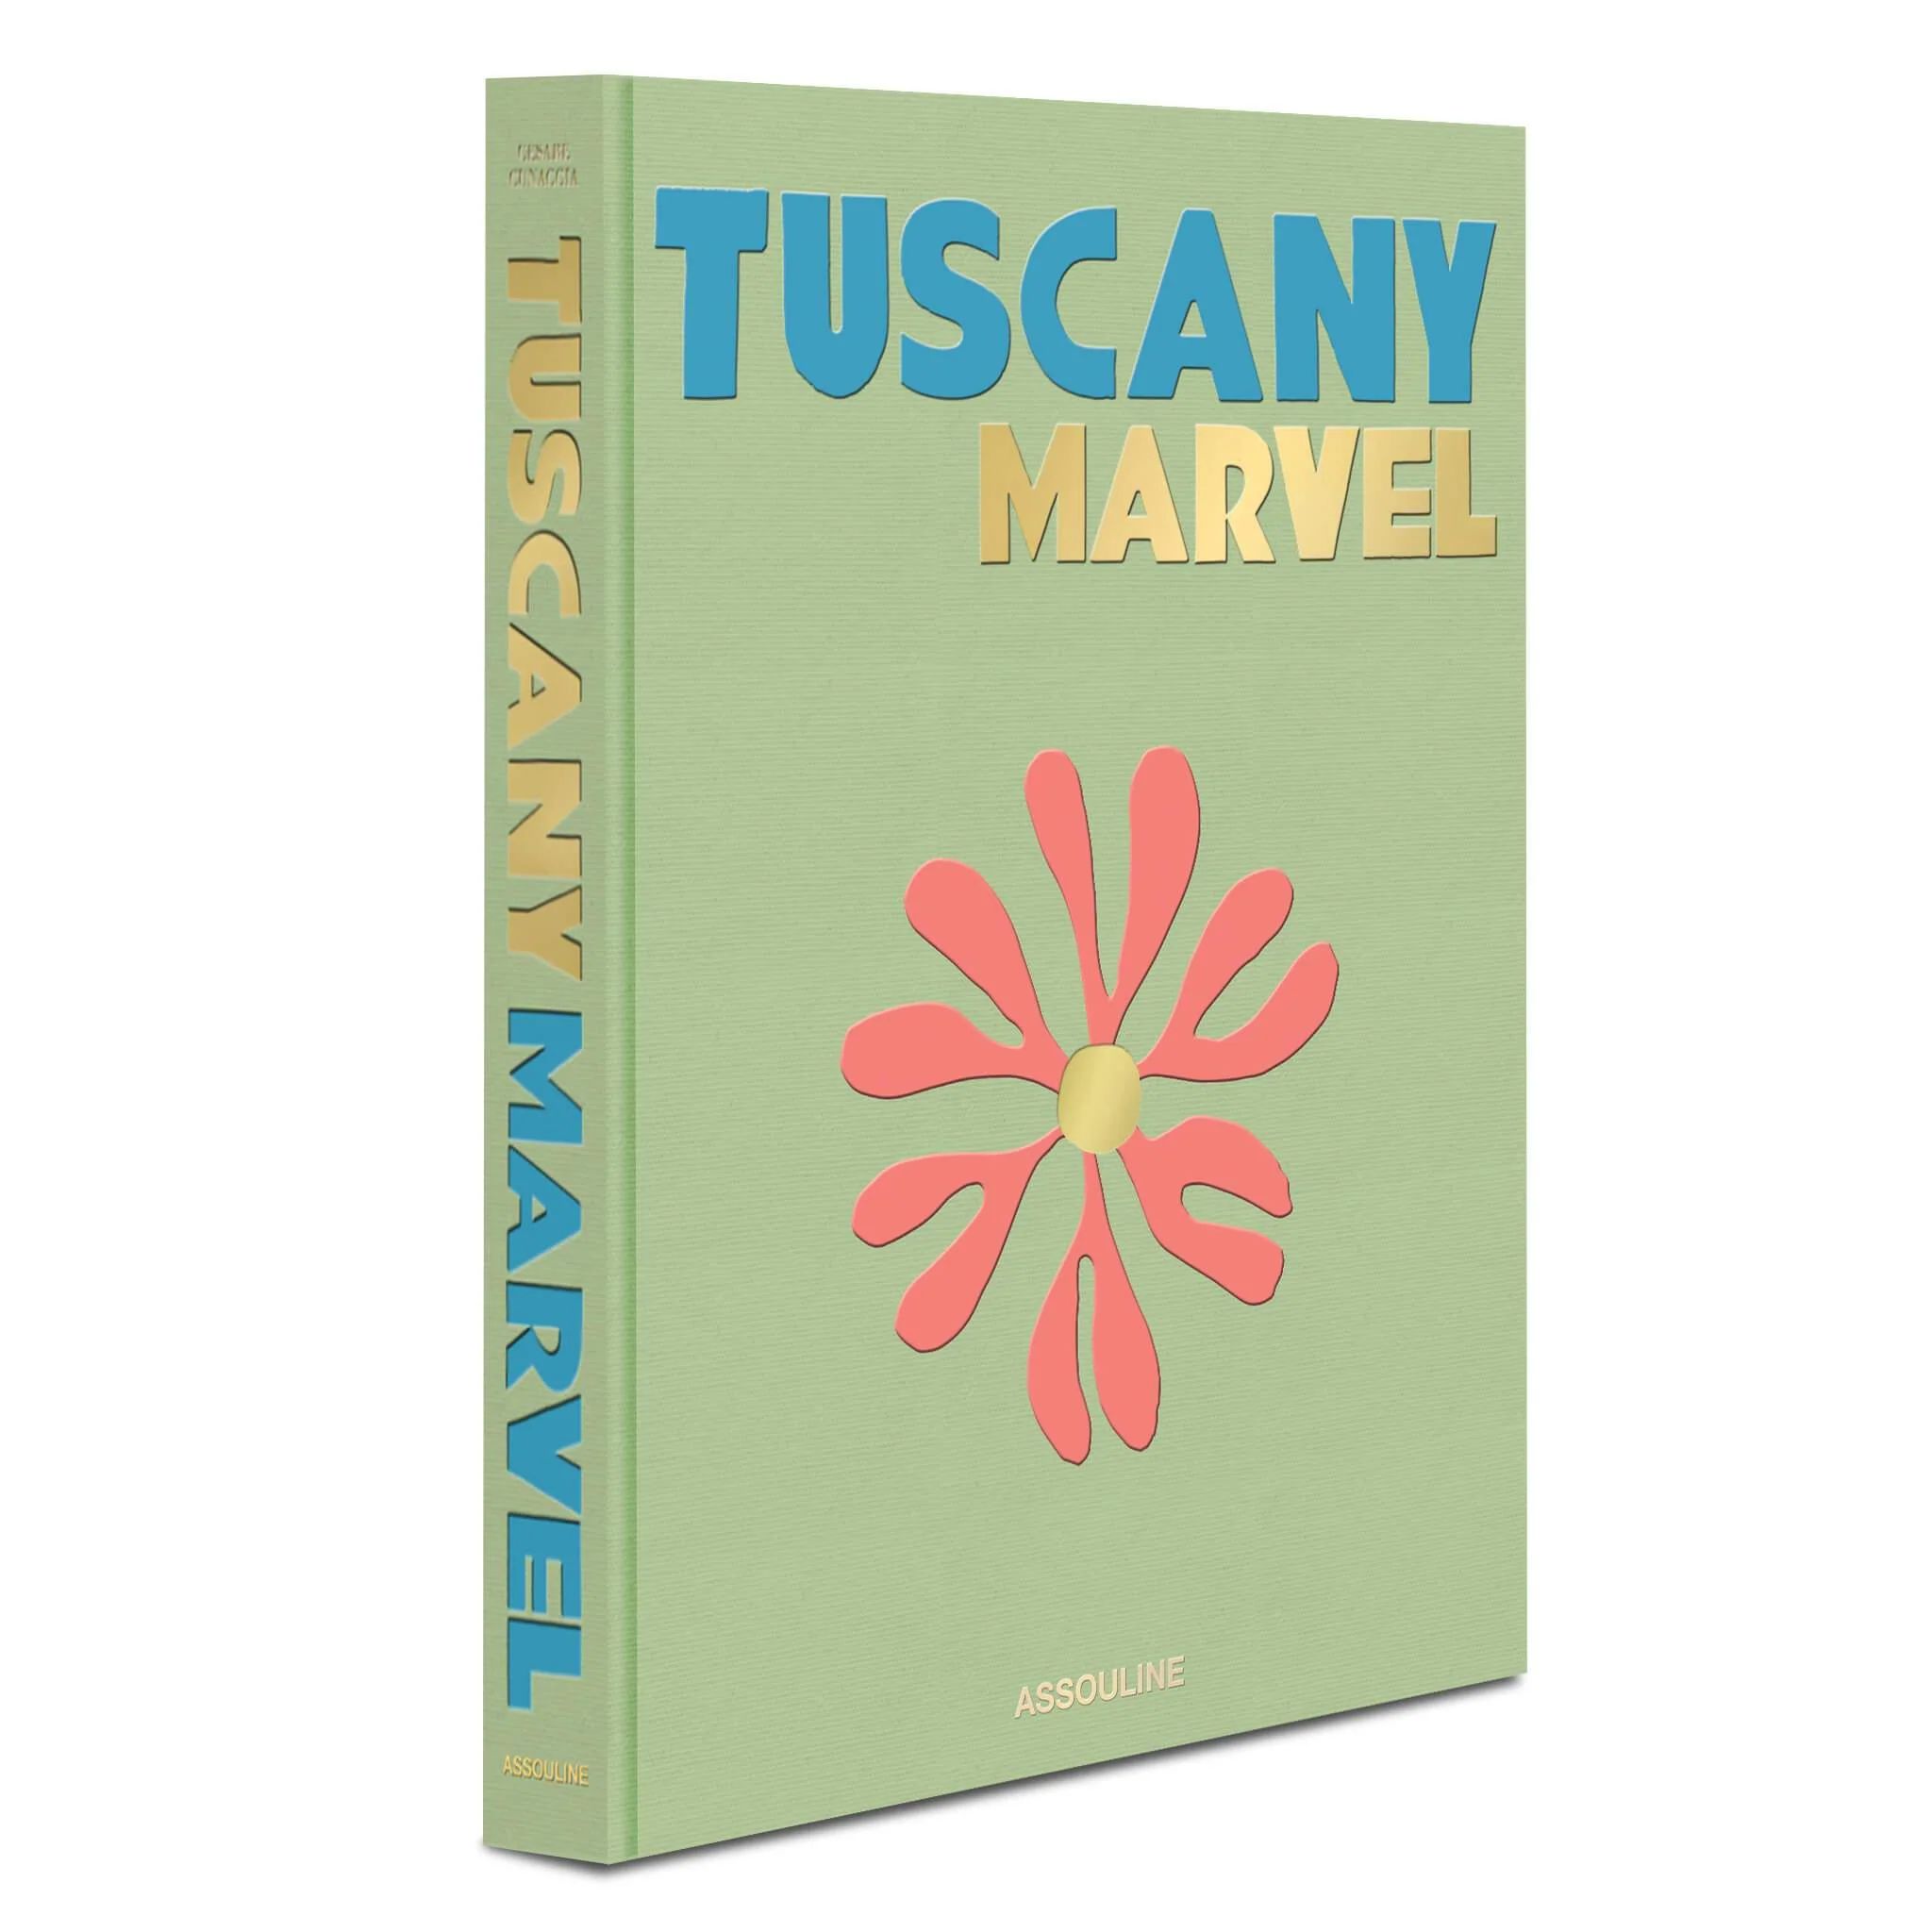 Tuscany Marvel by Cesare Cunaccia - Coffee Table Book | ASSOULINE | Assouline